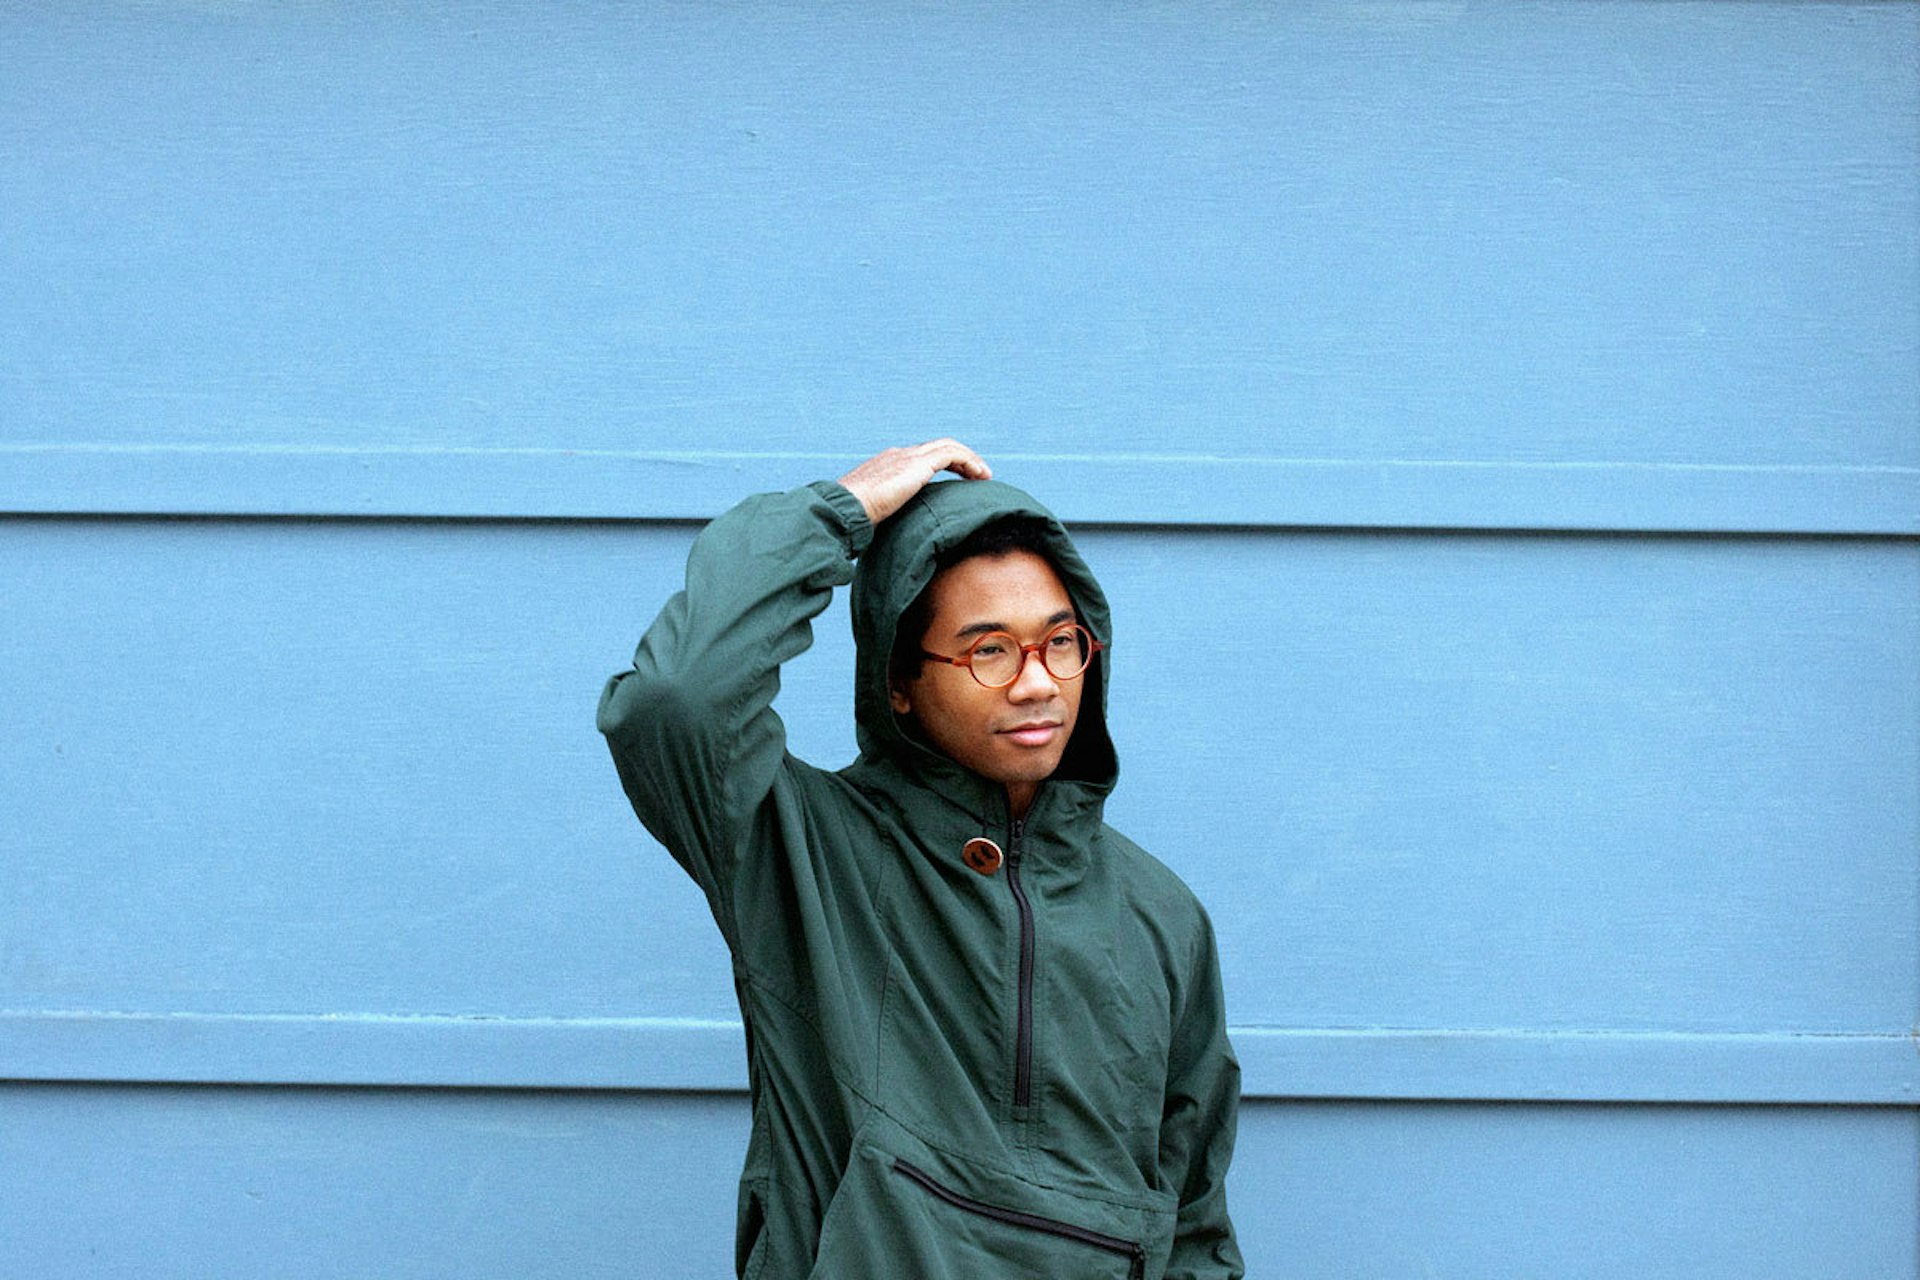 Toro y Moi's Chaz Bundick on how flipping burgers can make your dreams come true